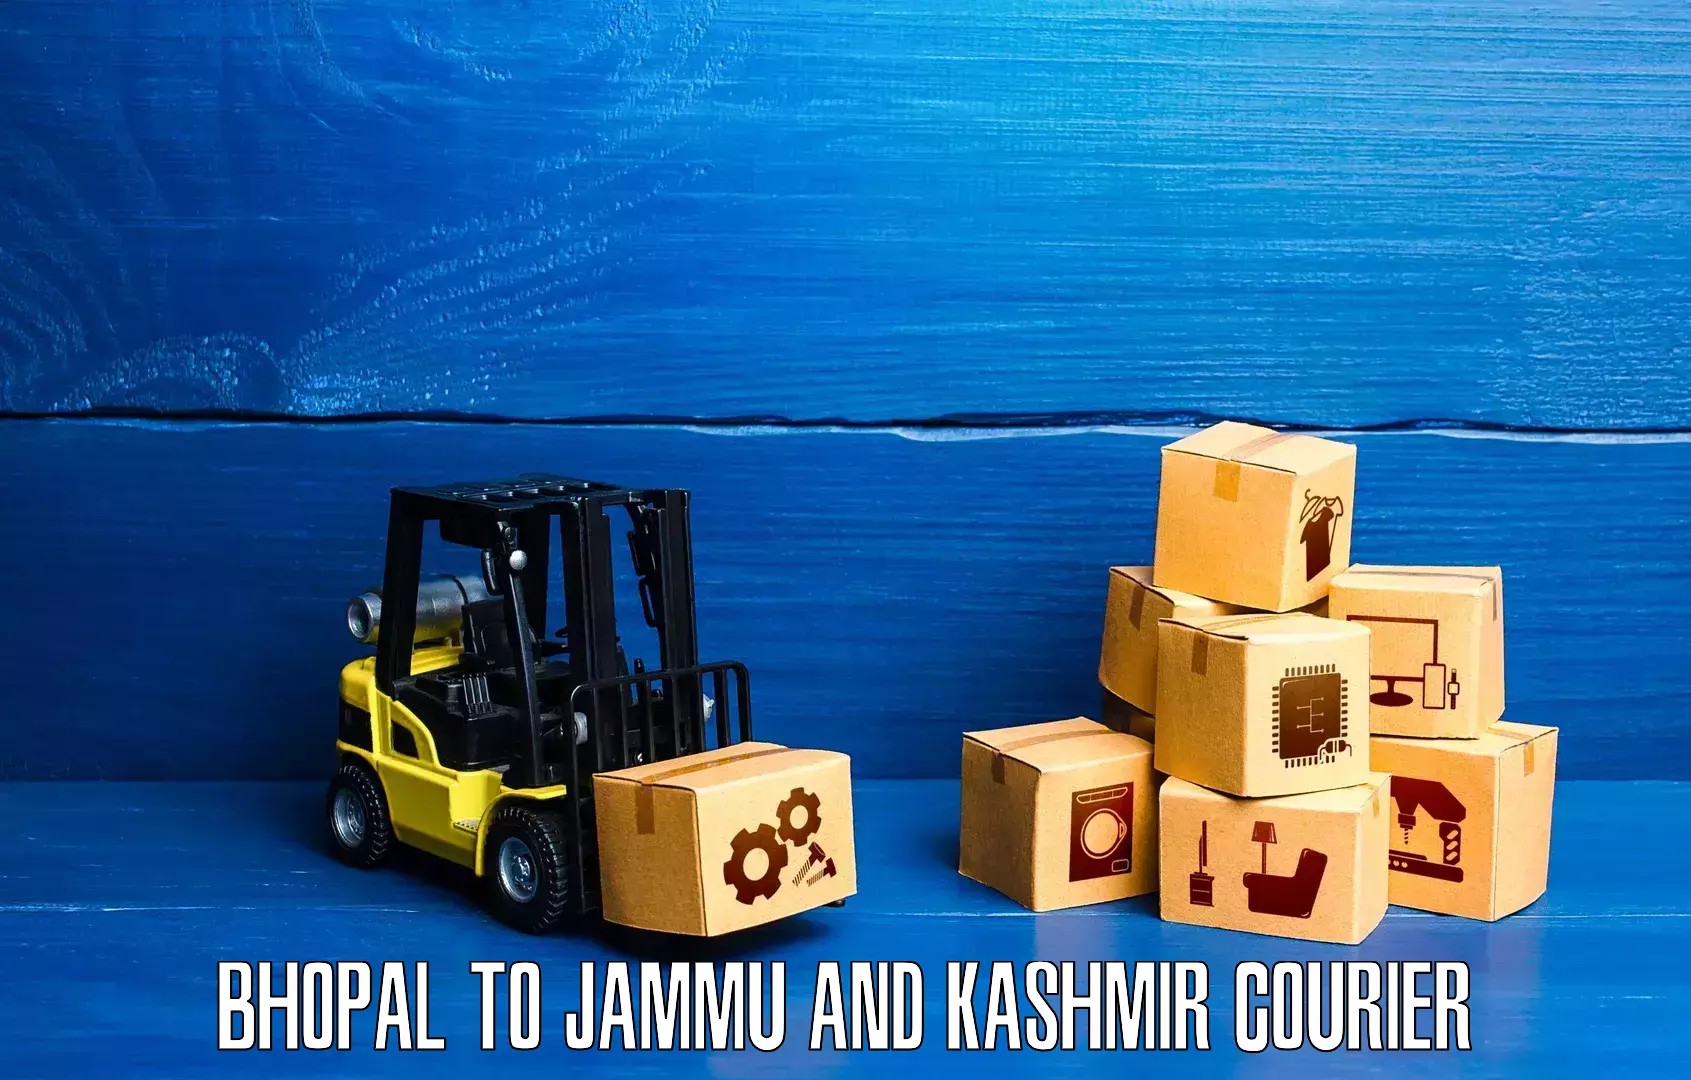 Express delivery network Bhopal to Jammu and Kashmir